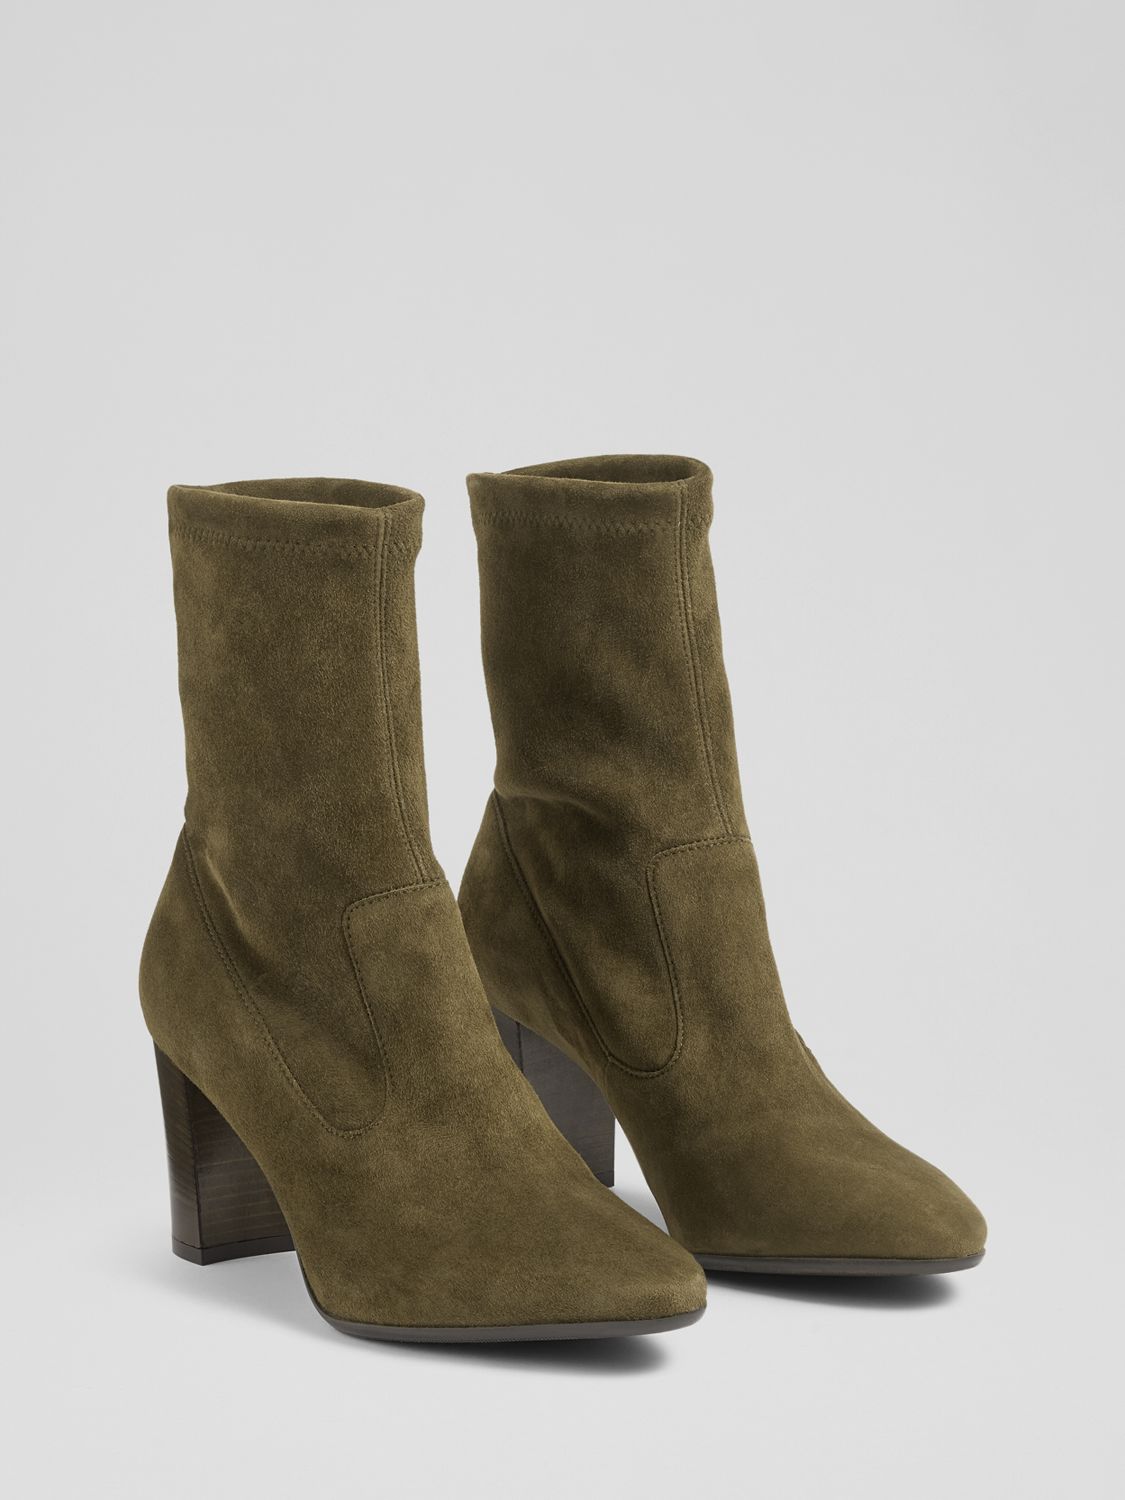 L.K.Bennett Alice Suede Ankle Boots, Olive at John Lewis & Partners